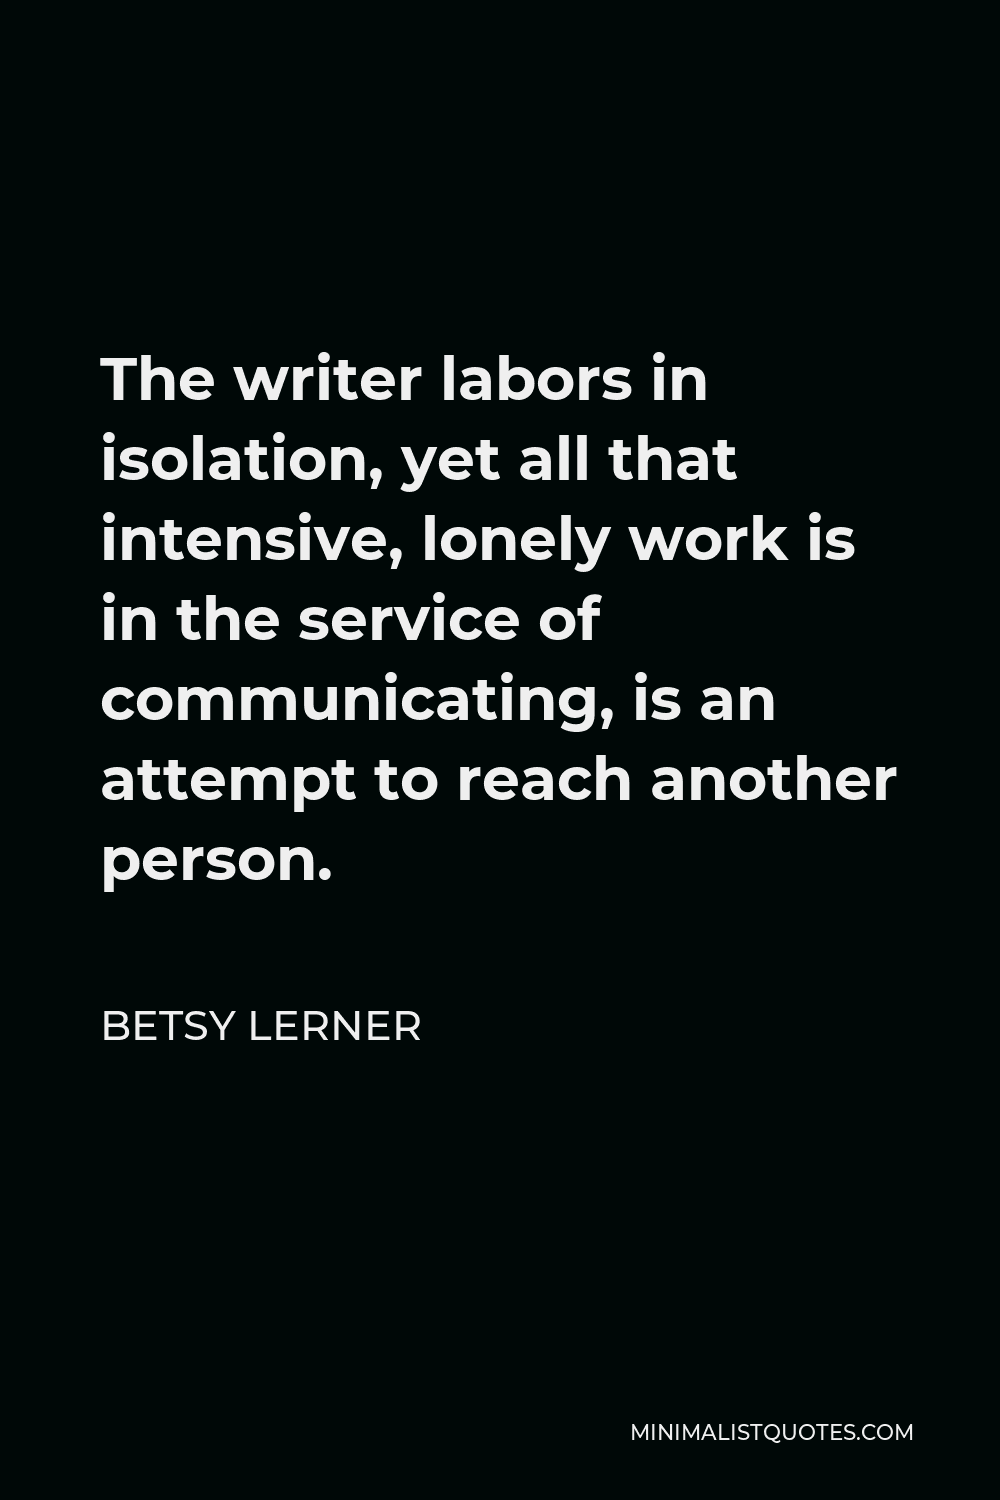 Betsy Lerner Quote - The writer labors in isolation, yet all that intensive, lonely work is in the service of communicating, is an attempt to reach another person.